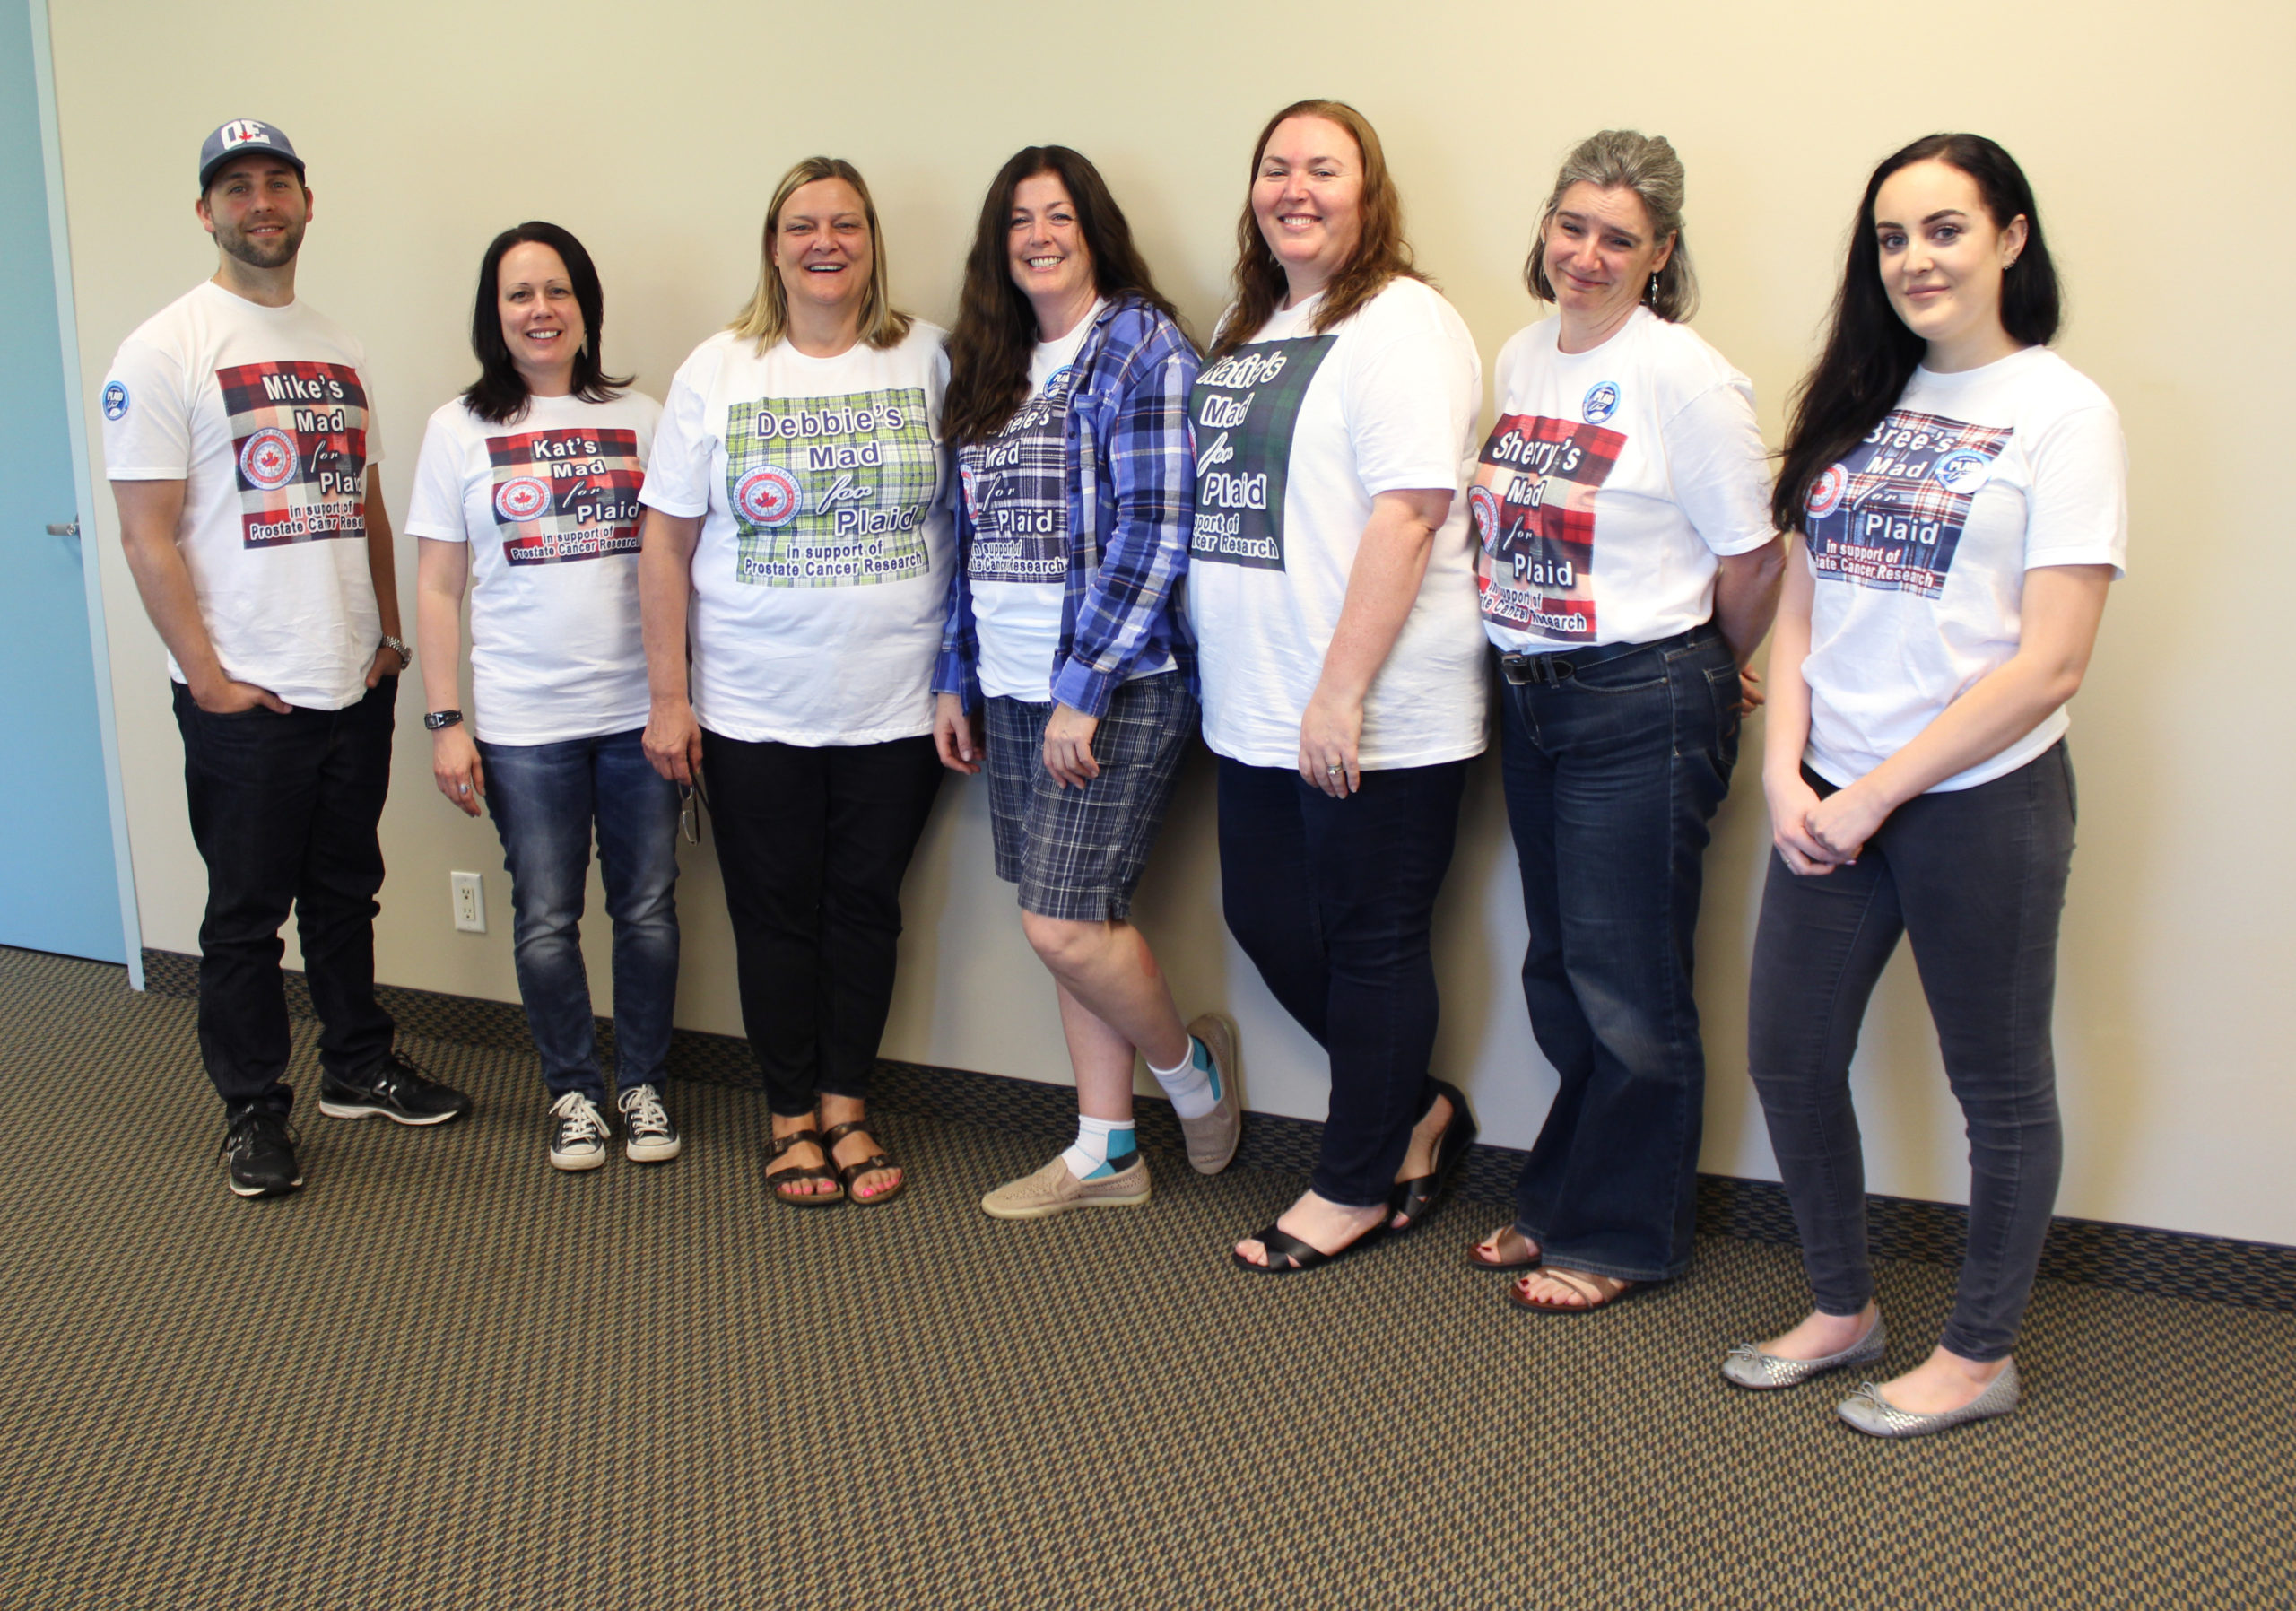 Local 793 and OETIO staff took part in the Plaid for Dad campaign, helping to raise funds for prostate cancer research.